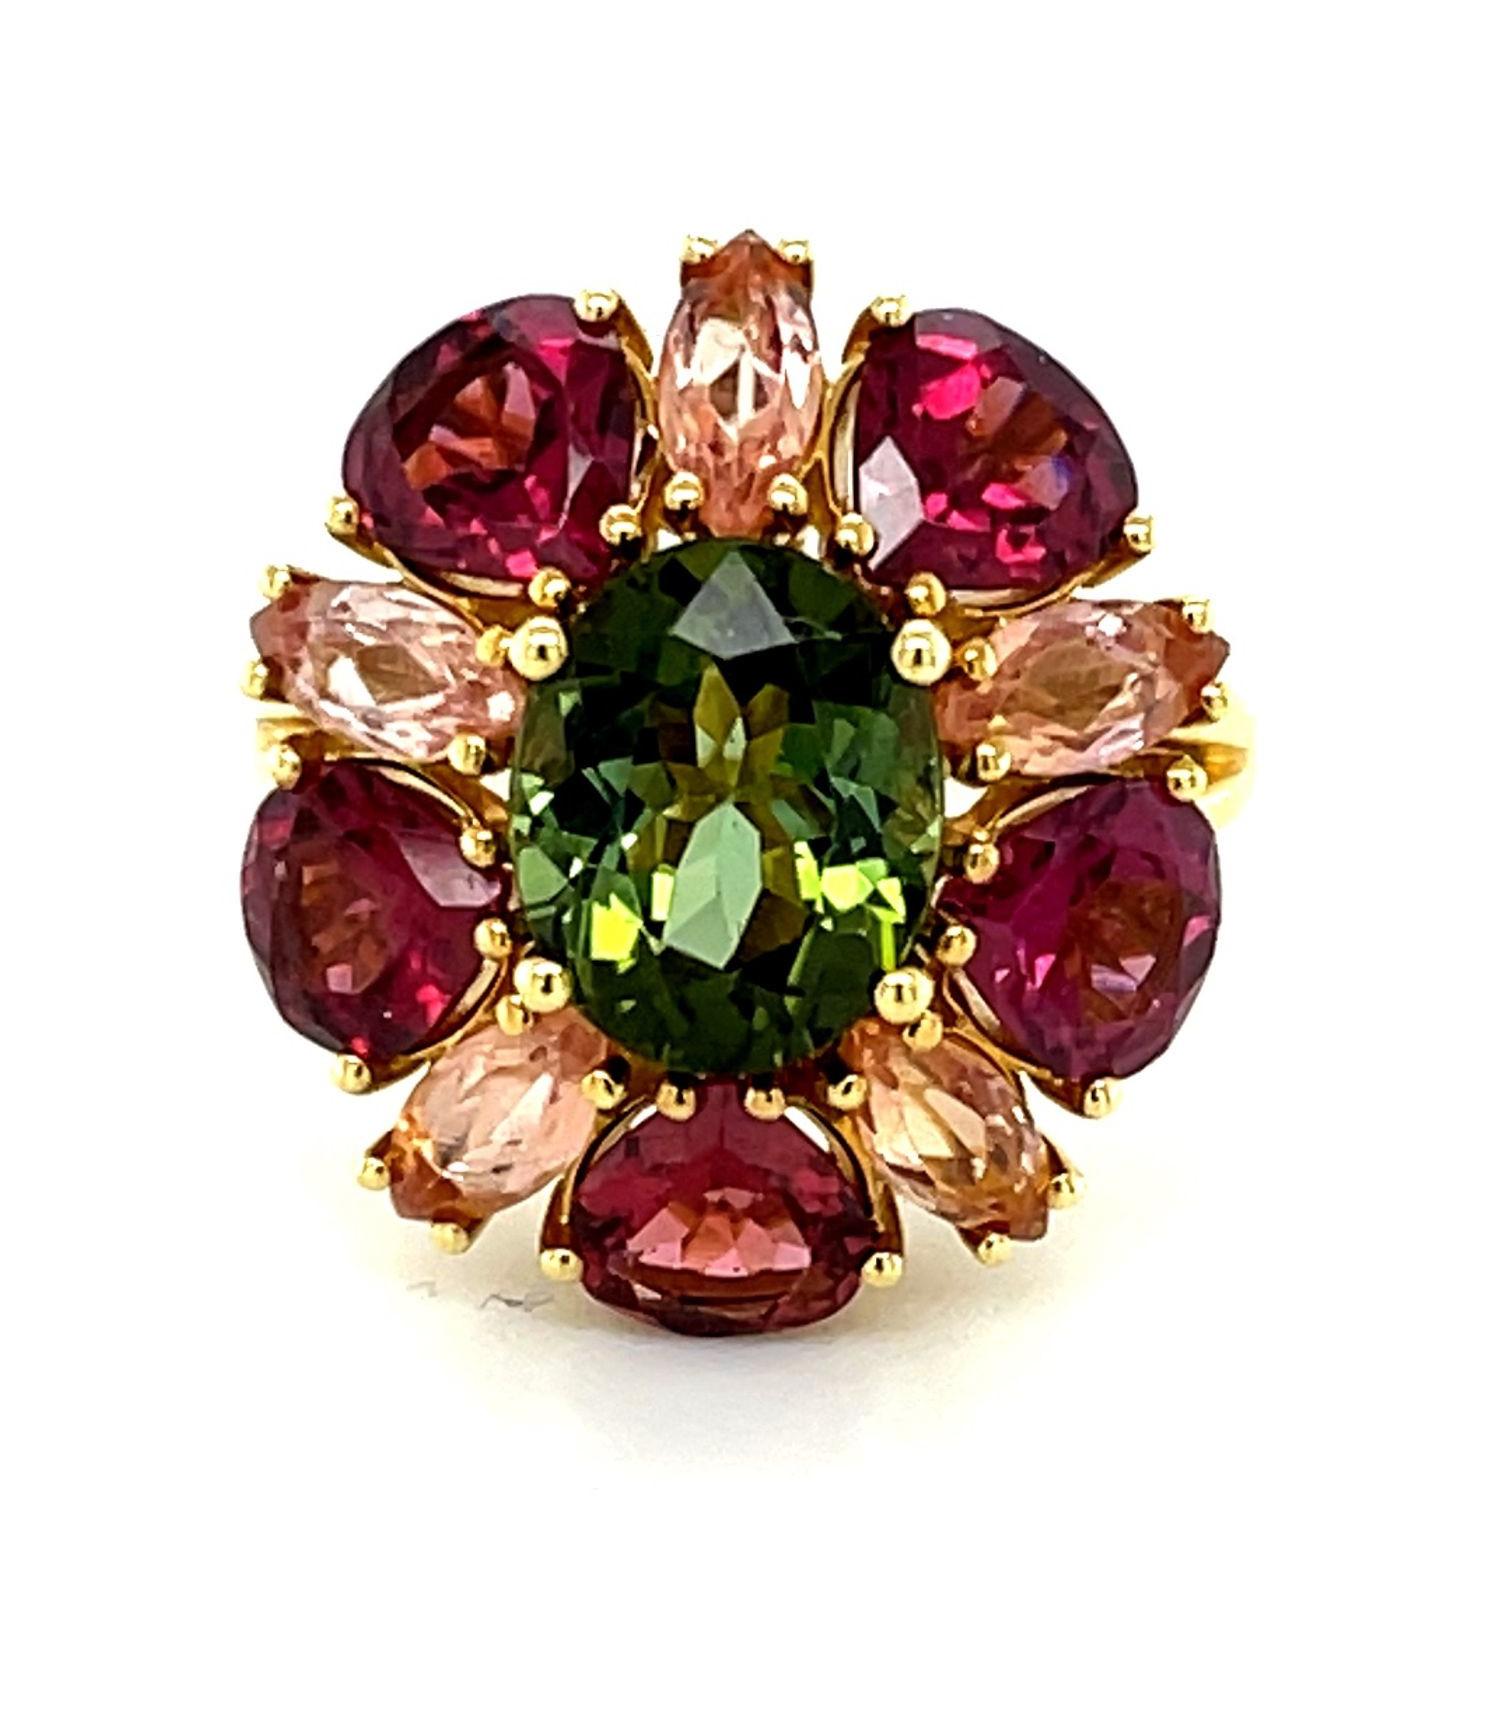 This happy ring designed with a kaleidoscope of gems is sure to make you smile! A vivid green tourmaline oval is encircled by rounded pear-shaped garnets and marquise shaped precious topazes in a unique combination of gemstone colors and shapes that